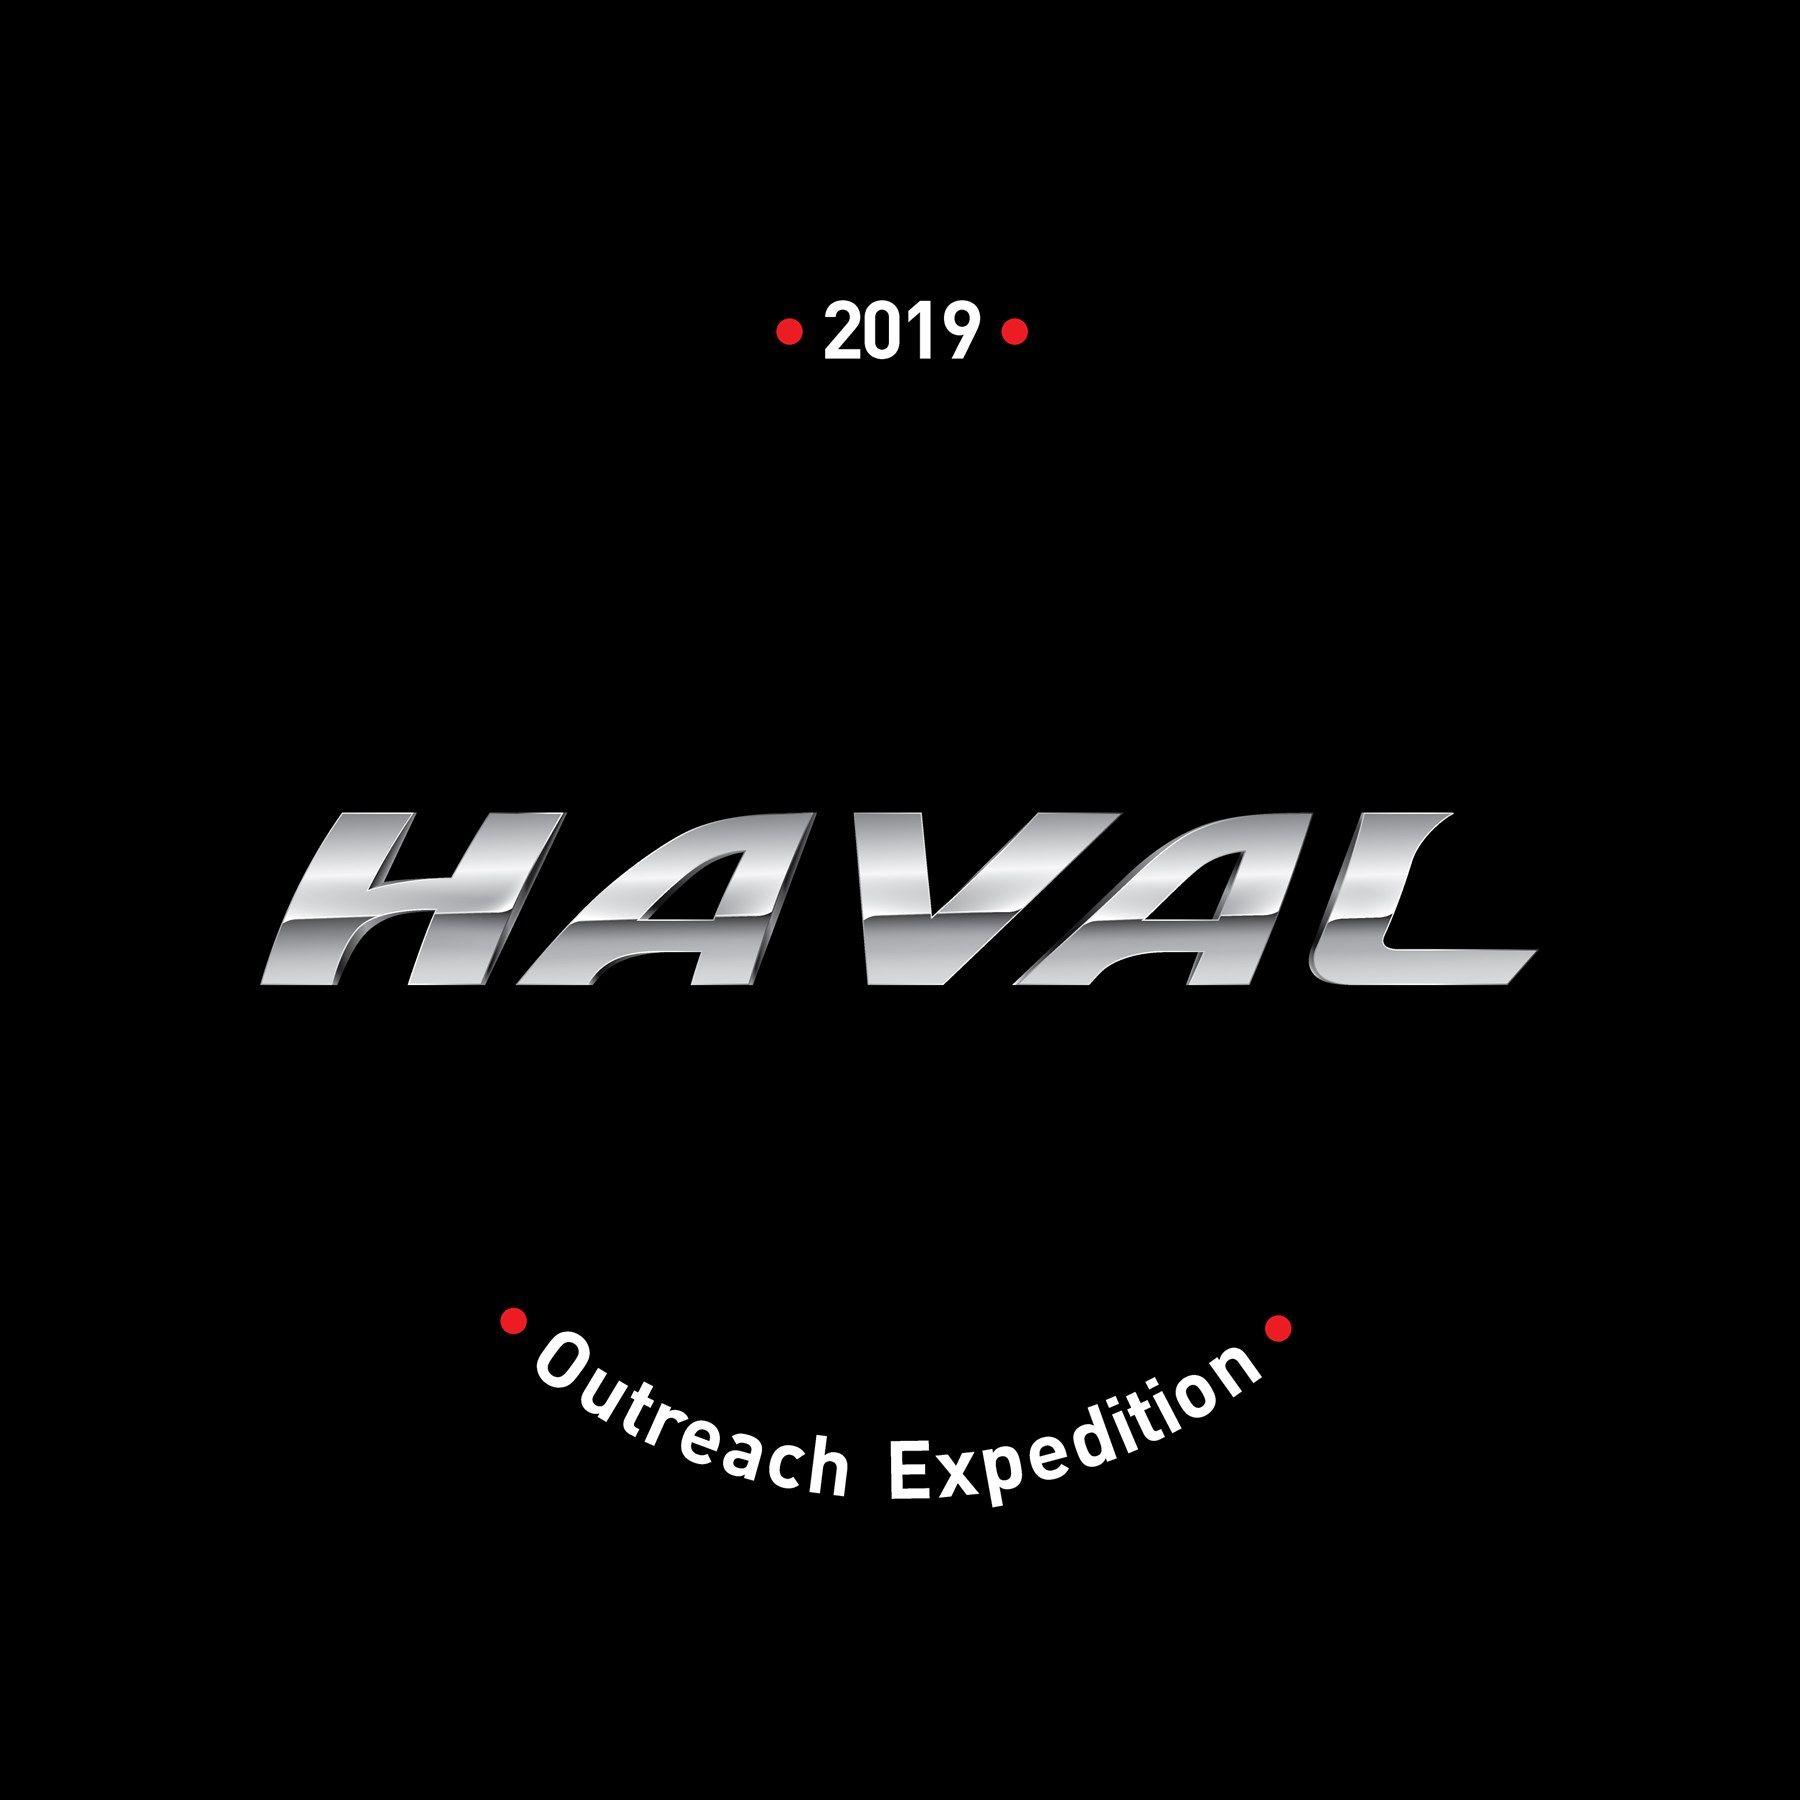 Haval Logo - Haval Motors South Africa is about to embark on second annual ...